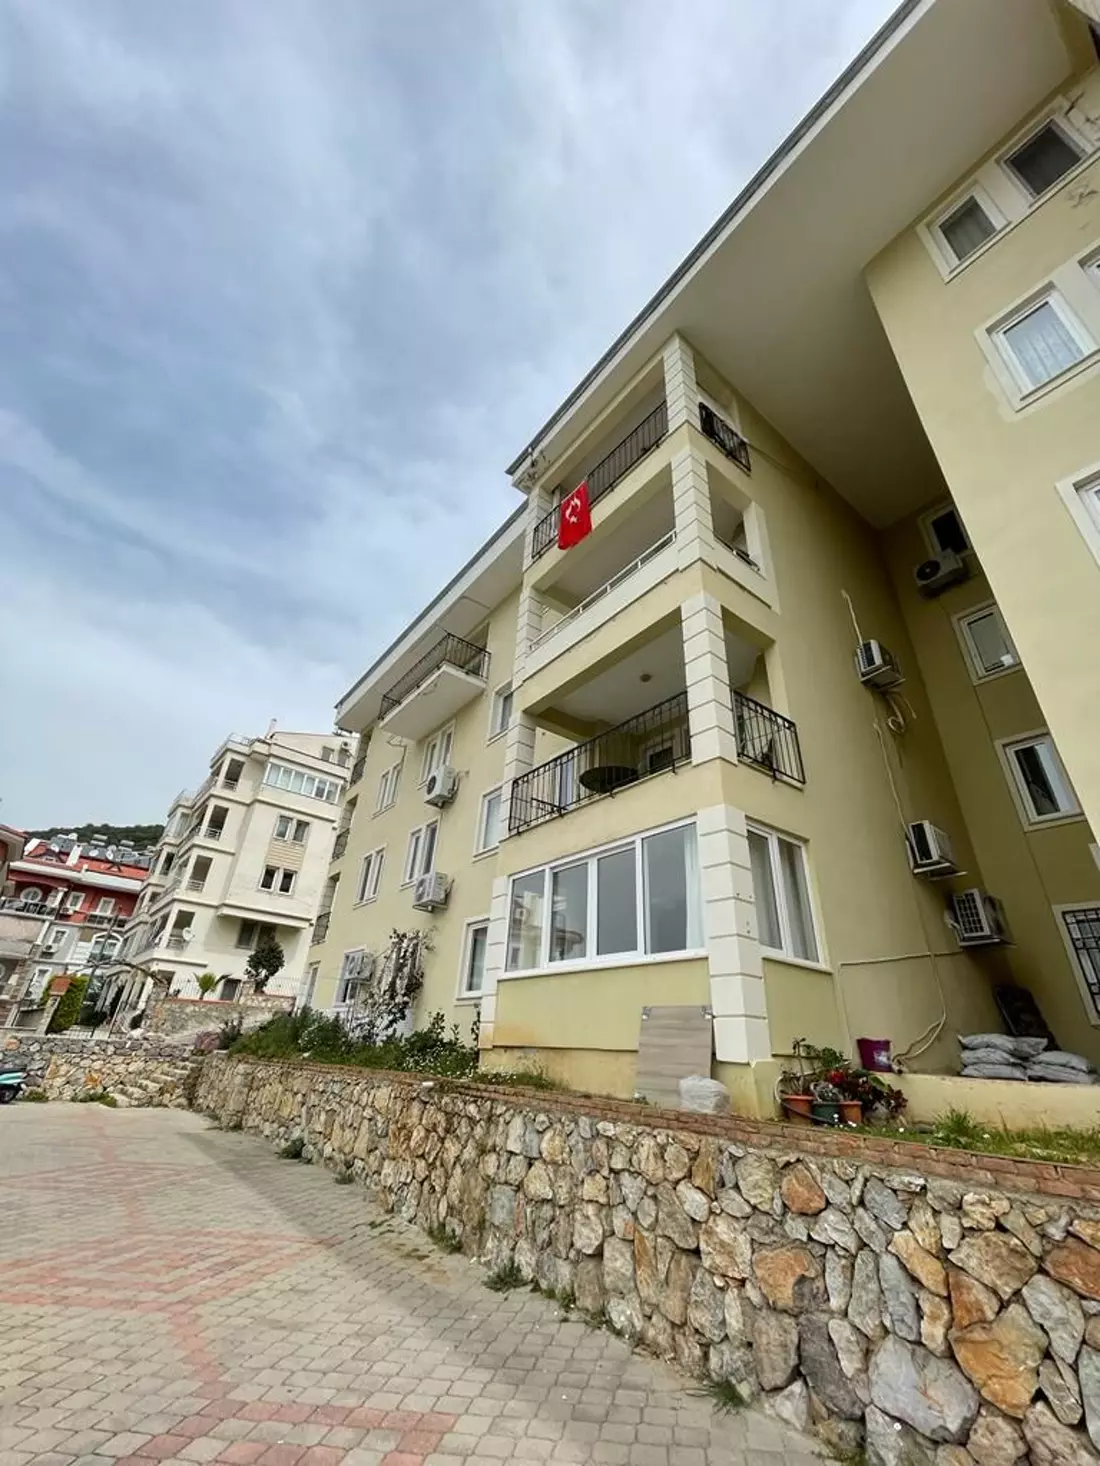 4+1 Roof Duplex Apartment For Sale With Sea & City View In Fethiye Patlangıç